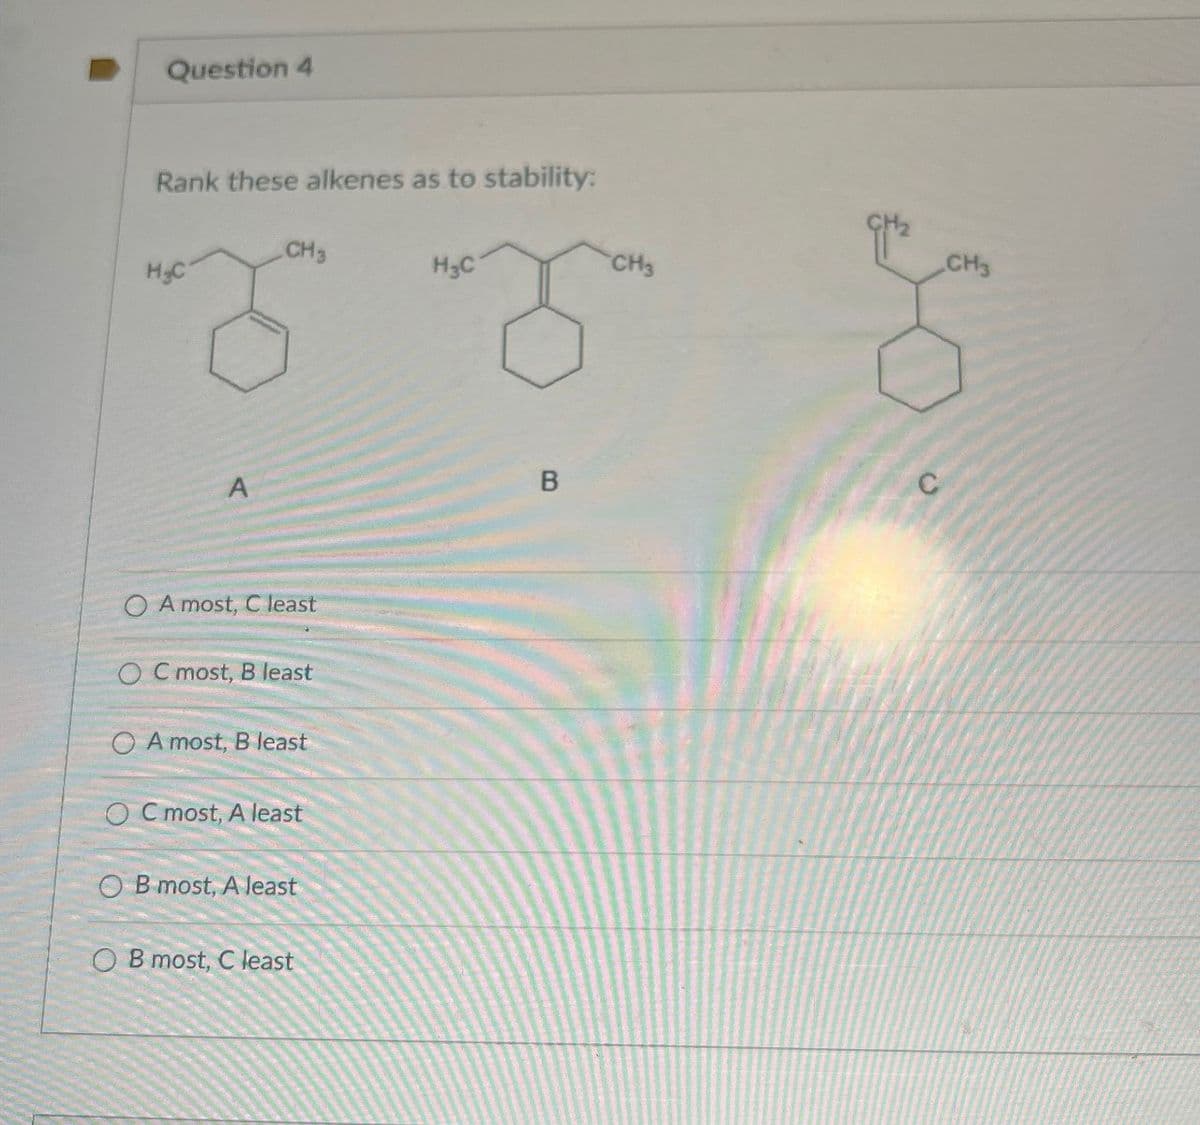 Question 4
Rank these alkenes as to stability:
CH3
H&C
H3C
A
OA most, C least
OC most, B least
OA most, B least
OC most, A least
OB most, A least
OB most, C least
B
CH3
CH3